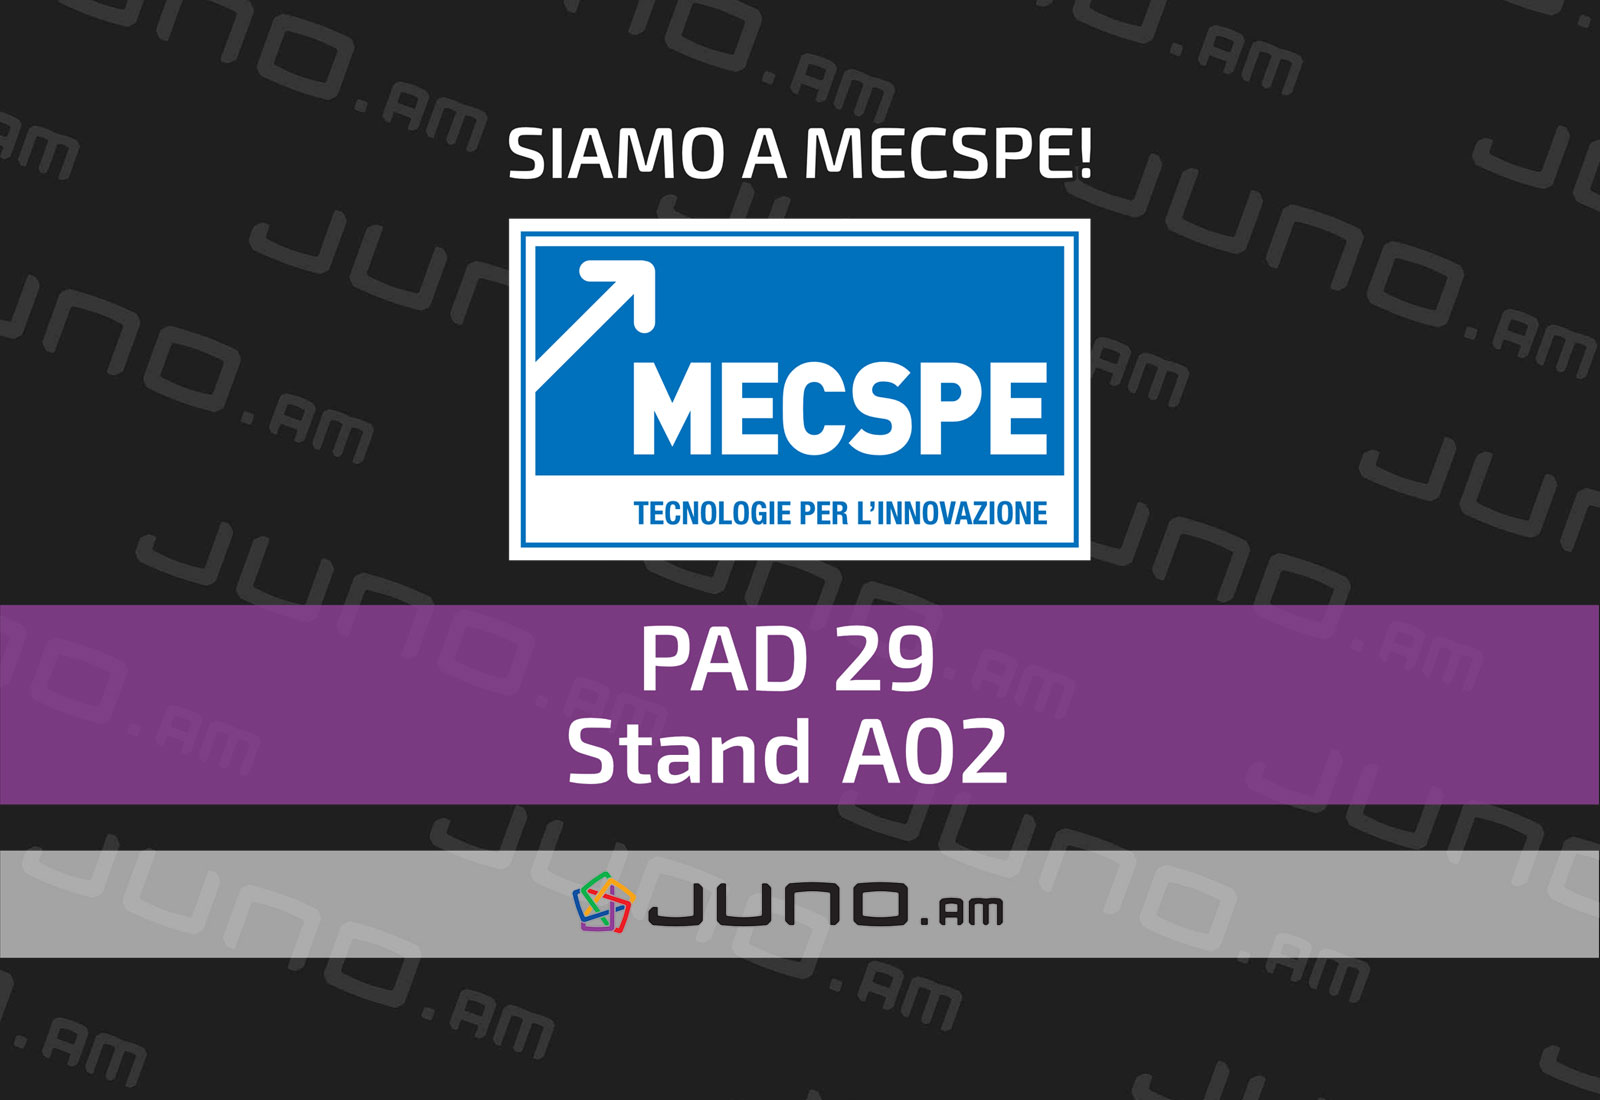 Juno is exhibiting at MECSPE 2022 in Bologna, Italy